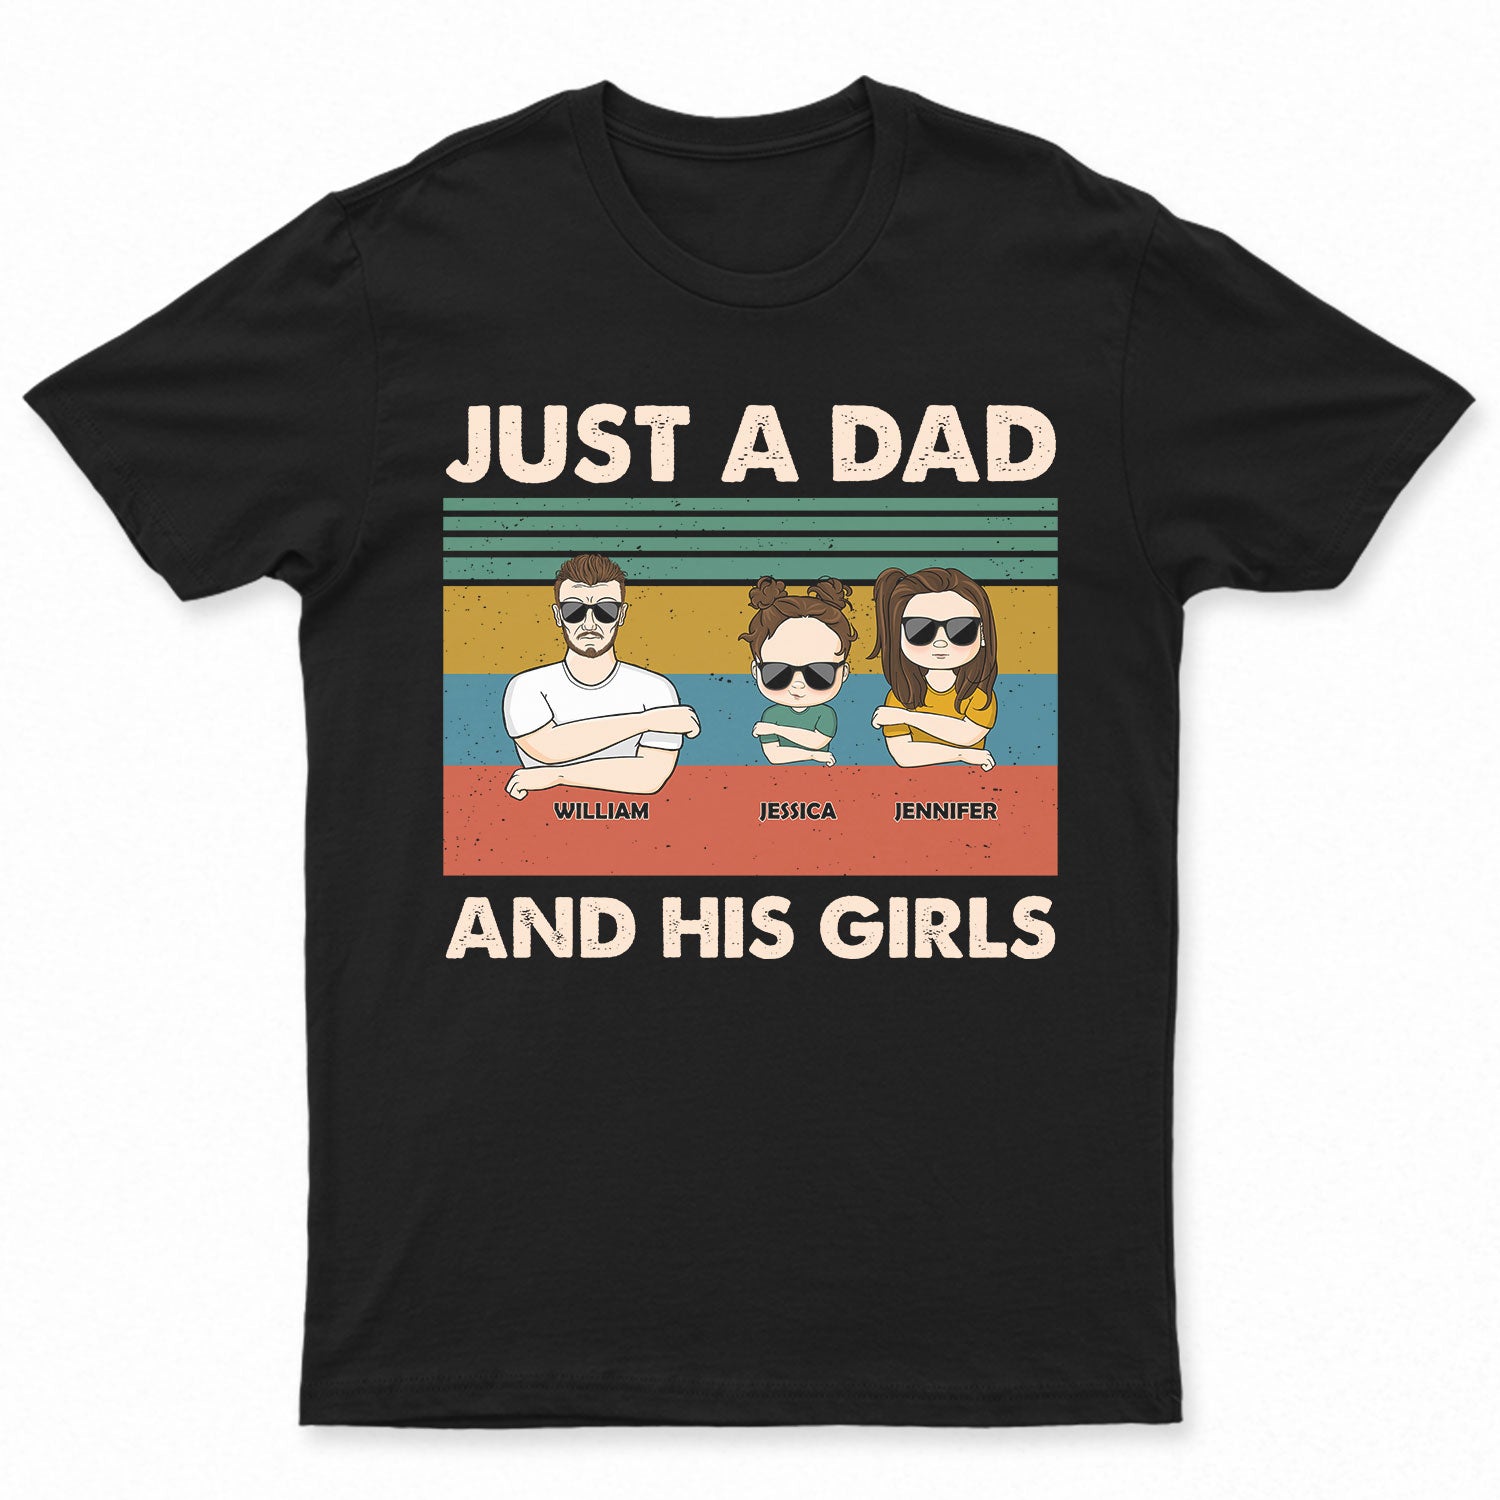 Just A Dad & His Girls - Gift For Father - Personalized Custom T Shirt